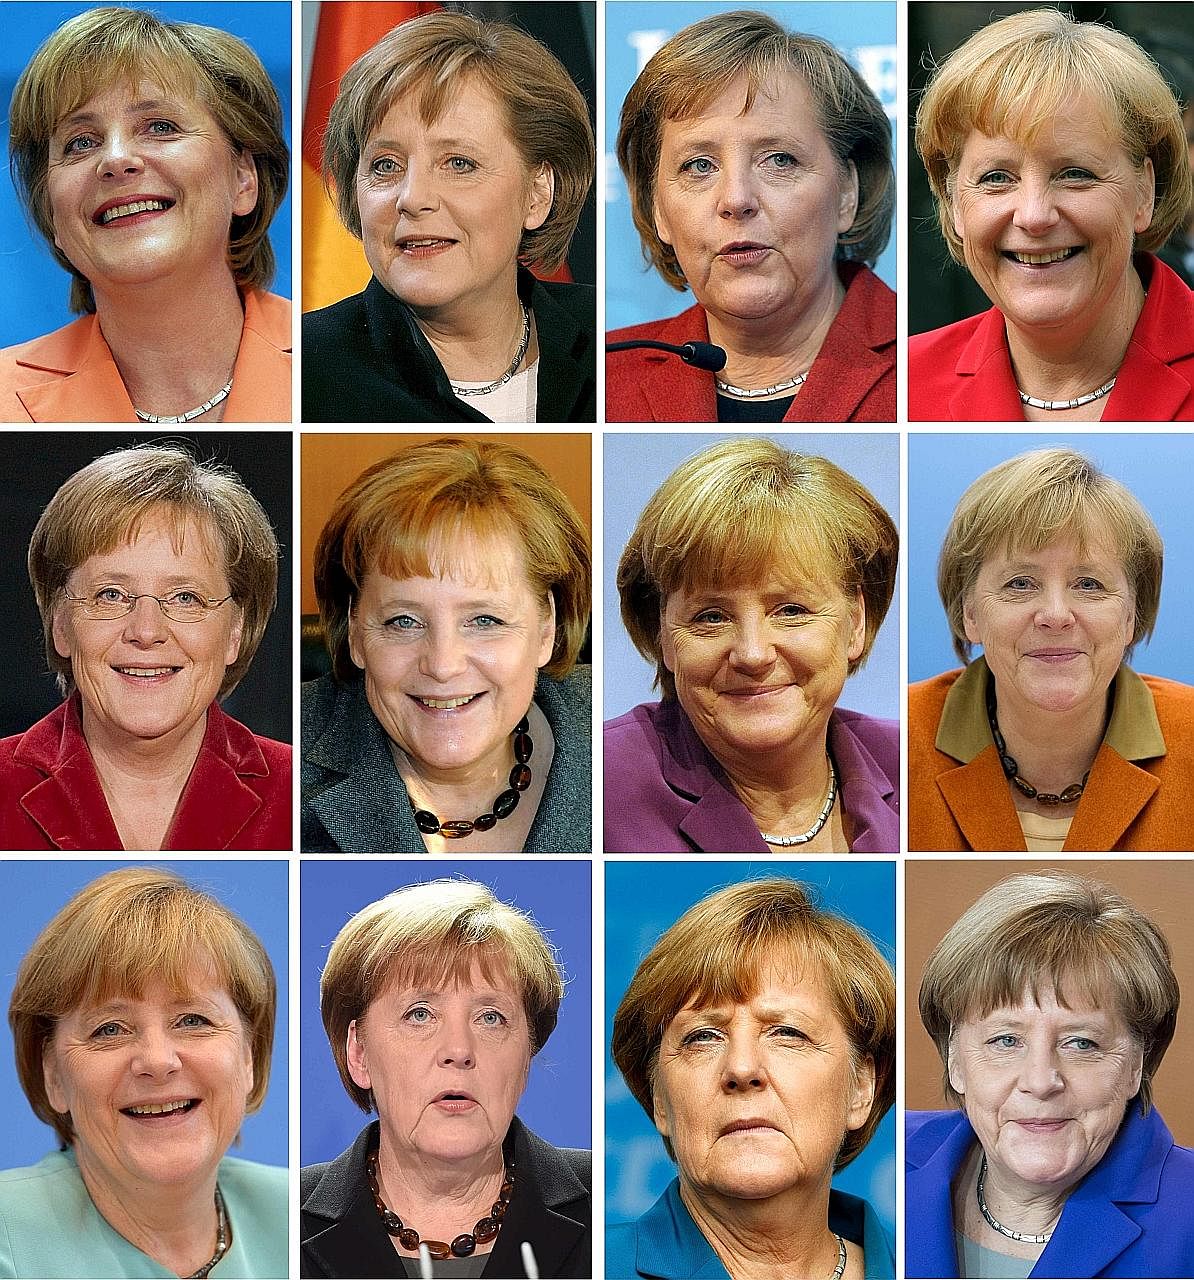 A pictorial record of German Chancellor Angela Merkel's years in office: (top row, from left) 2005, 2006, 2007, 2008 (second row from left) 2009, 2010, 2011, 2012, and (third row from left) 2013, 2014, 2015, 2016.